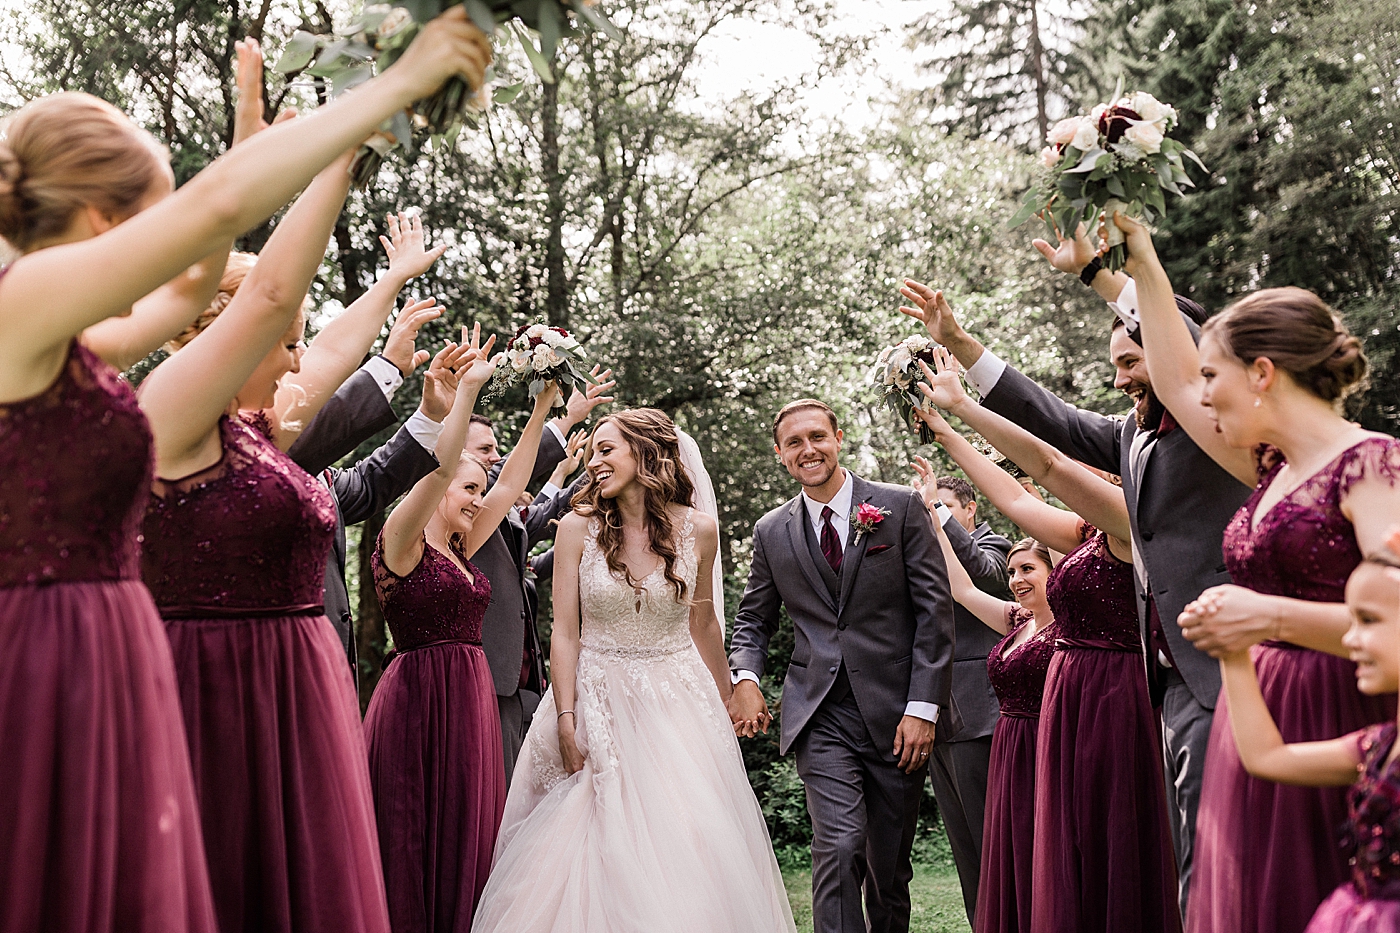 Bridal party wedding photos at Cedar Springs in Port Orchard, WA. Photographed by Tacoma Wedding Photographer, Megan Montalvo Photography. 